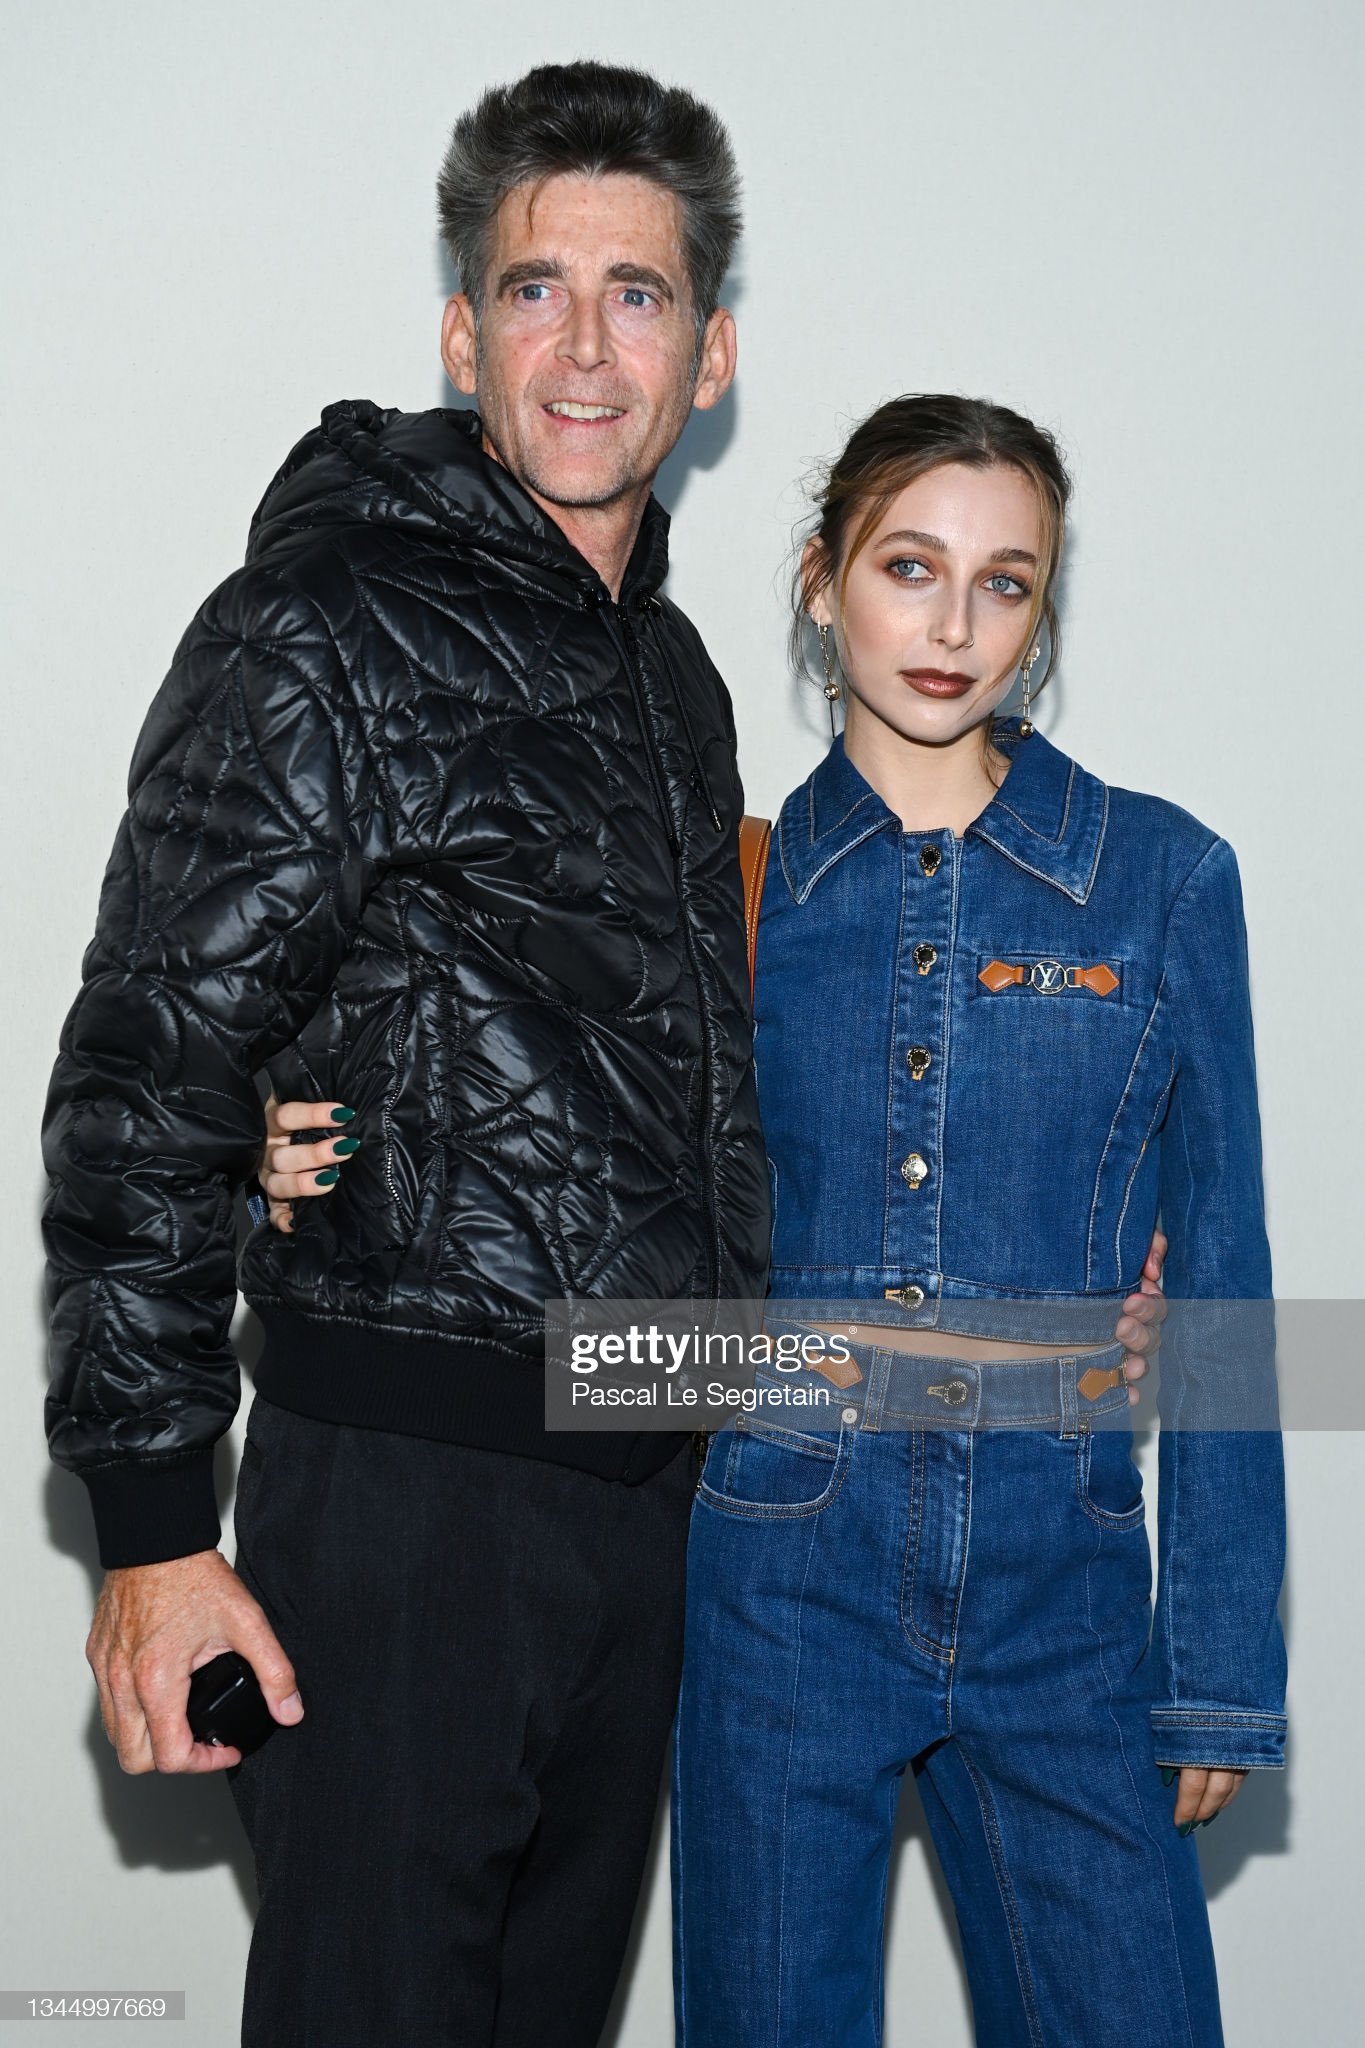 pen snap R sally on Twitter: "emma chamberlain and her dad at the louis vuitton show  in paris https://t.co/65CidKagKr" / Twitter